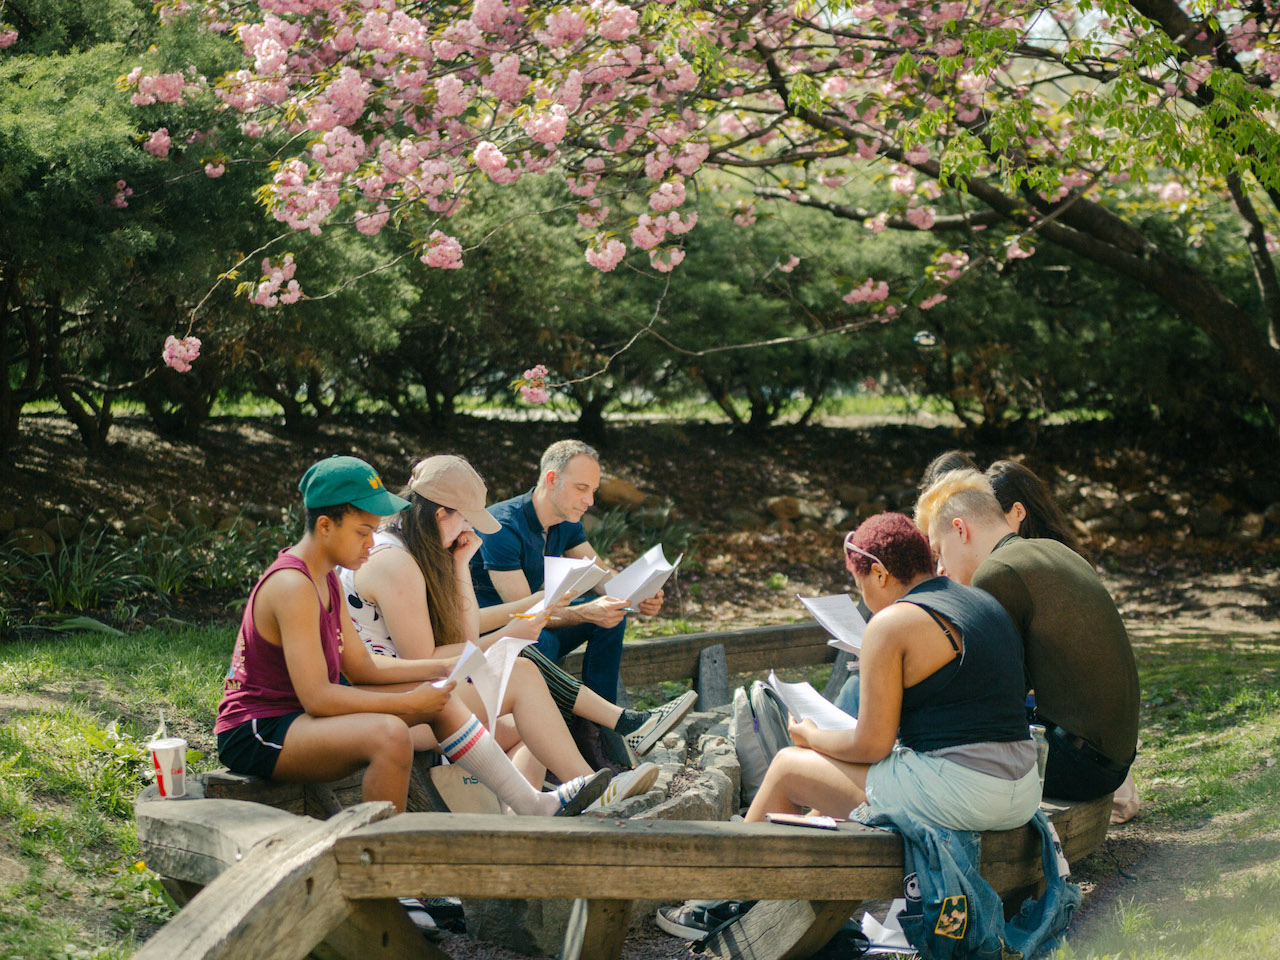 students gathered around a picnic table, on campus